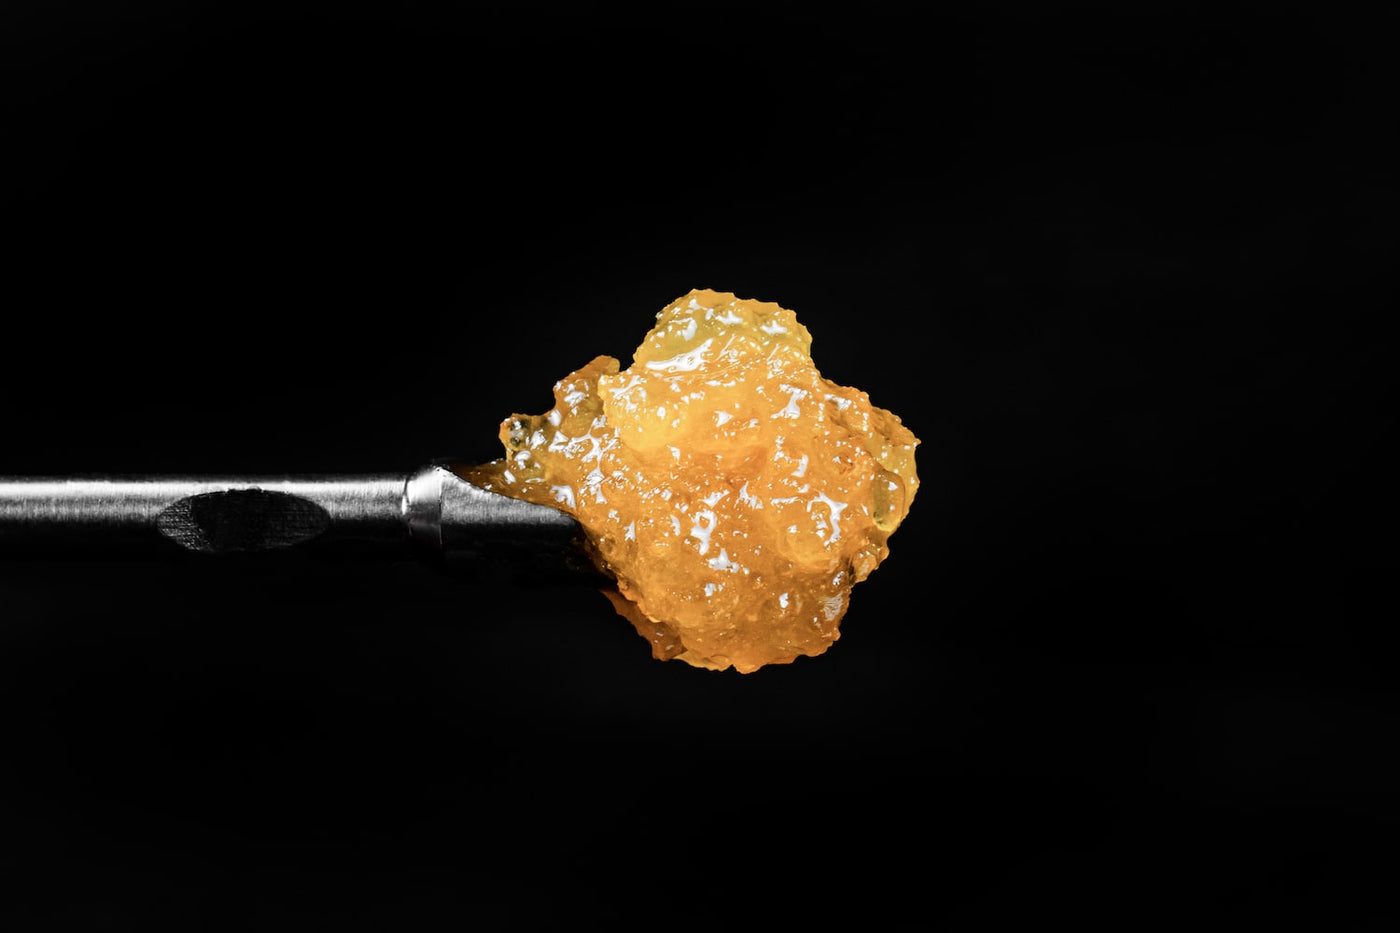 THREE LIVE RESIN CANNABIS EXTRACTS YOU SHOULD TRY